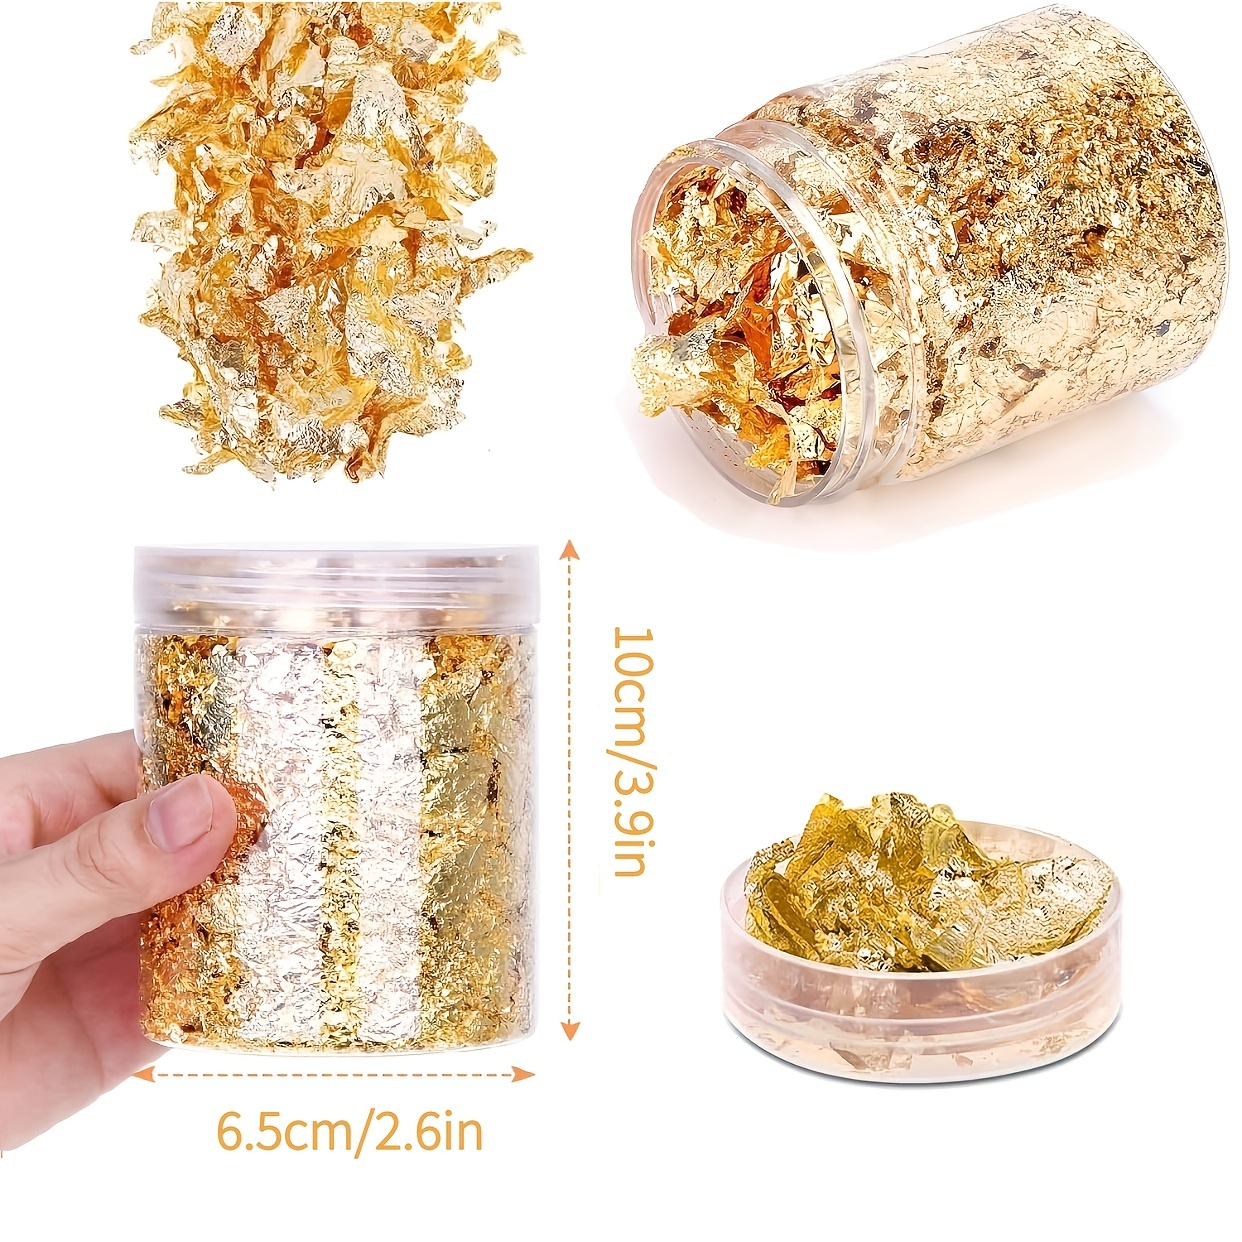 Gold Leaf, Gold Flakes, Gold Foil Flakes for Resin, Imitation Gold Foil  Flakes Metallic Leaf Gold Foil for Nails Painting Crafts Slime and Resin